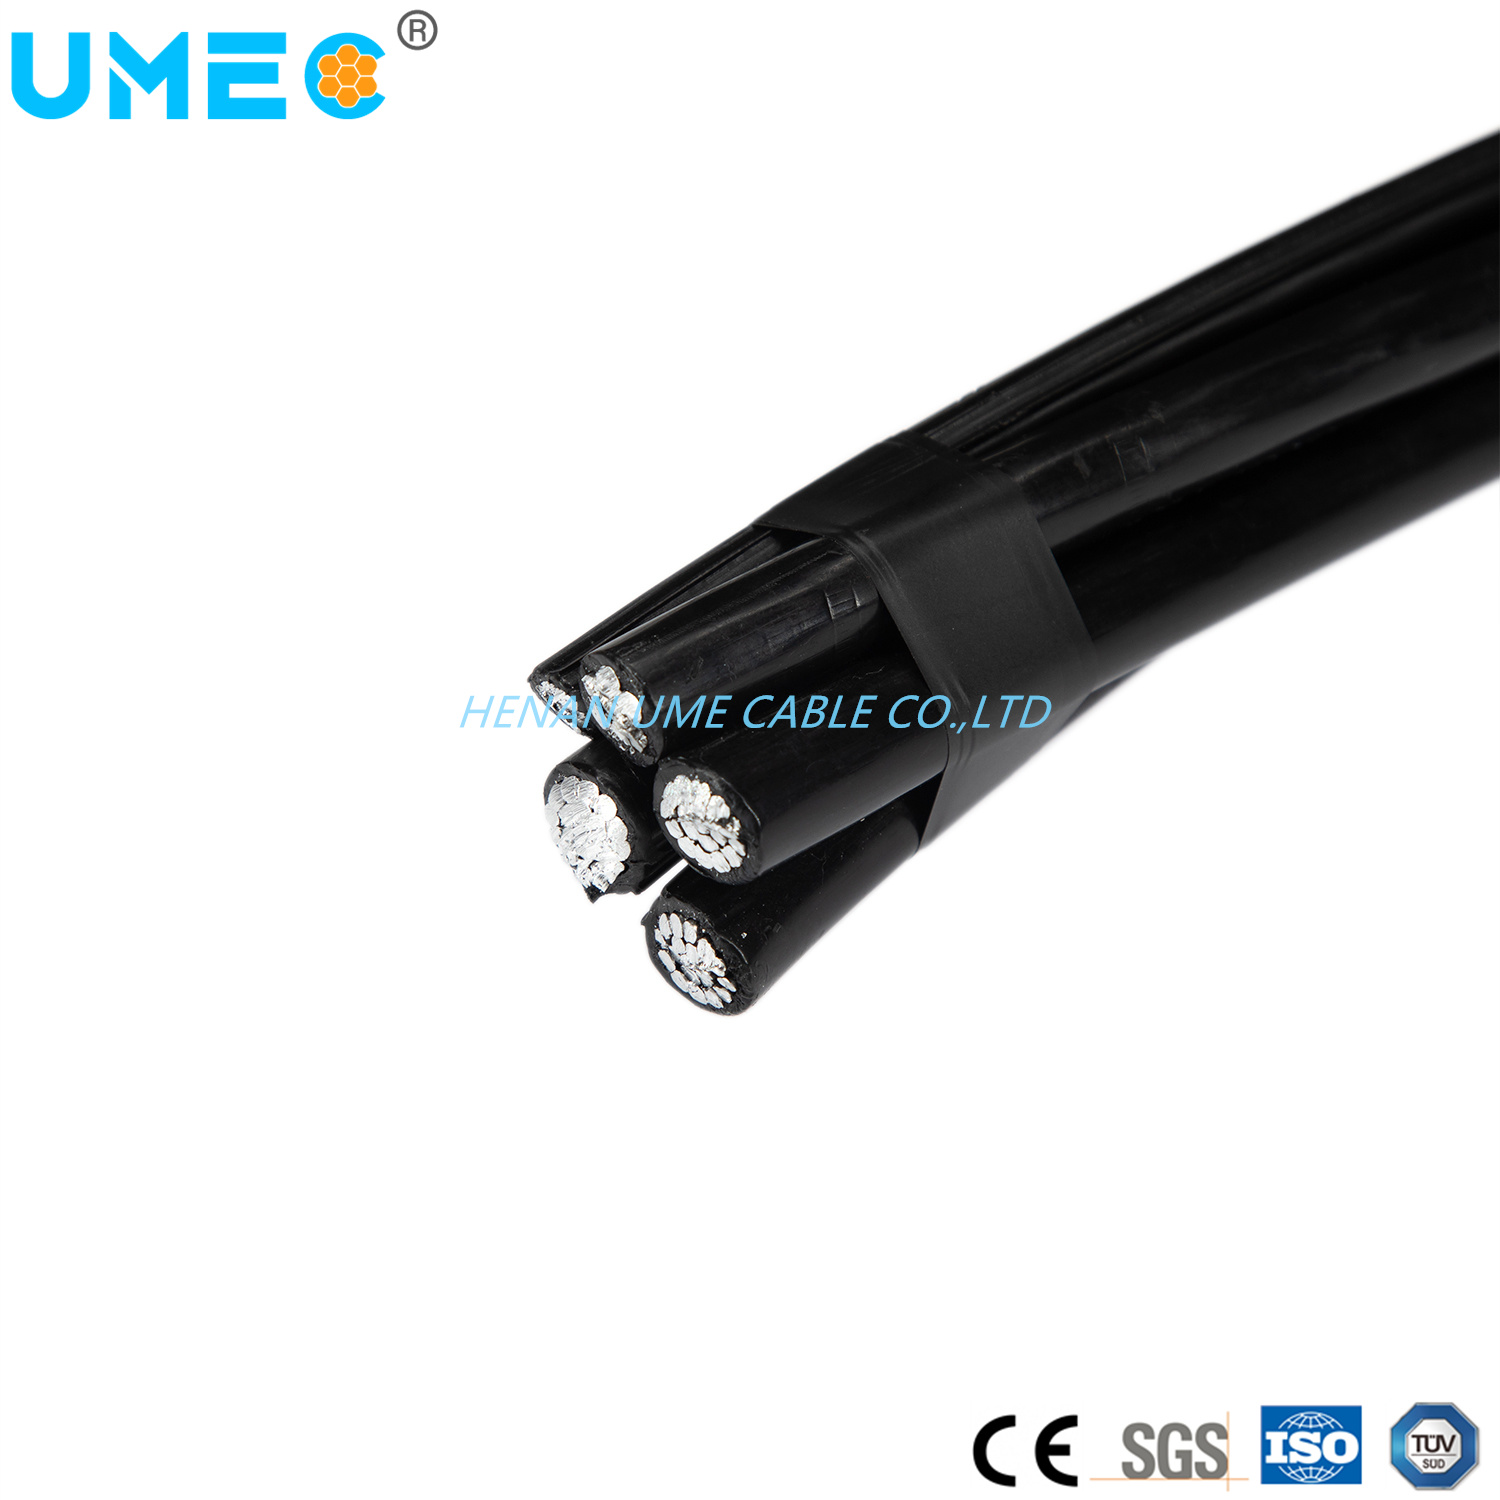 Low Voltage ABC Caai Cable 70/95/120/150mm XLPE Insulation Caai Cable / Self-Supporting Cable